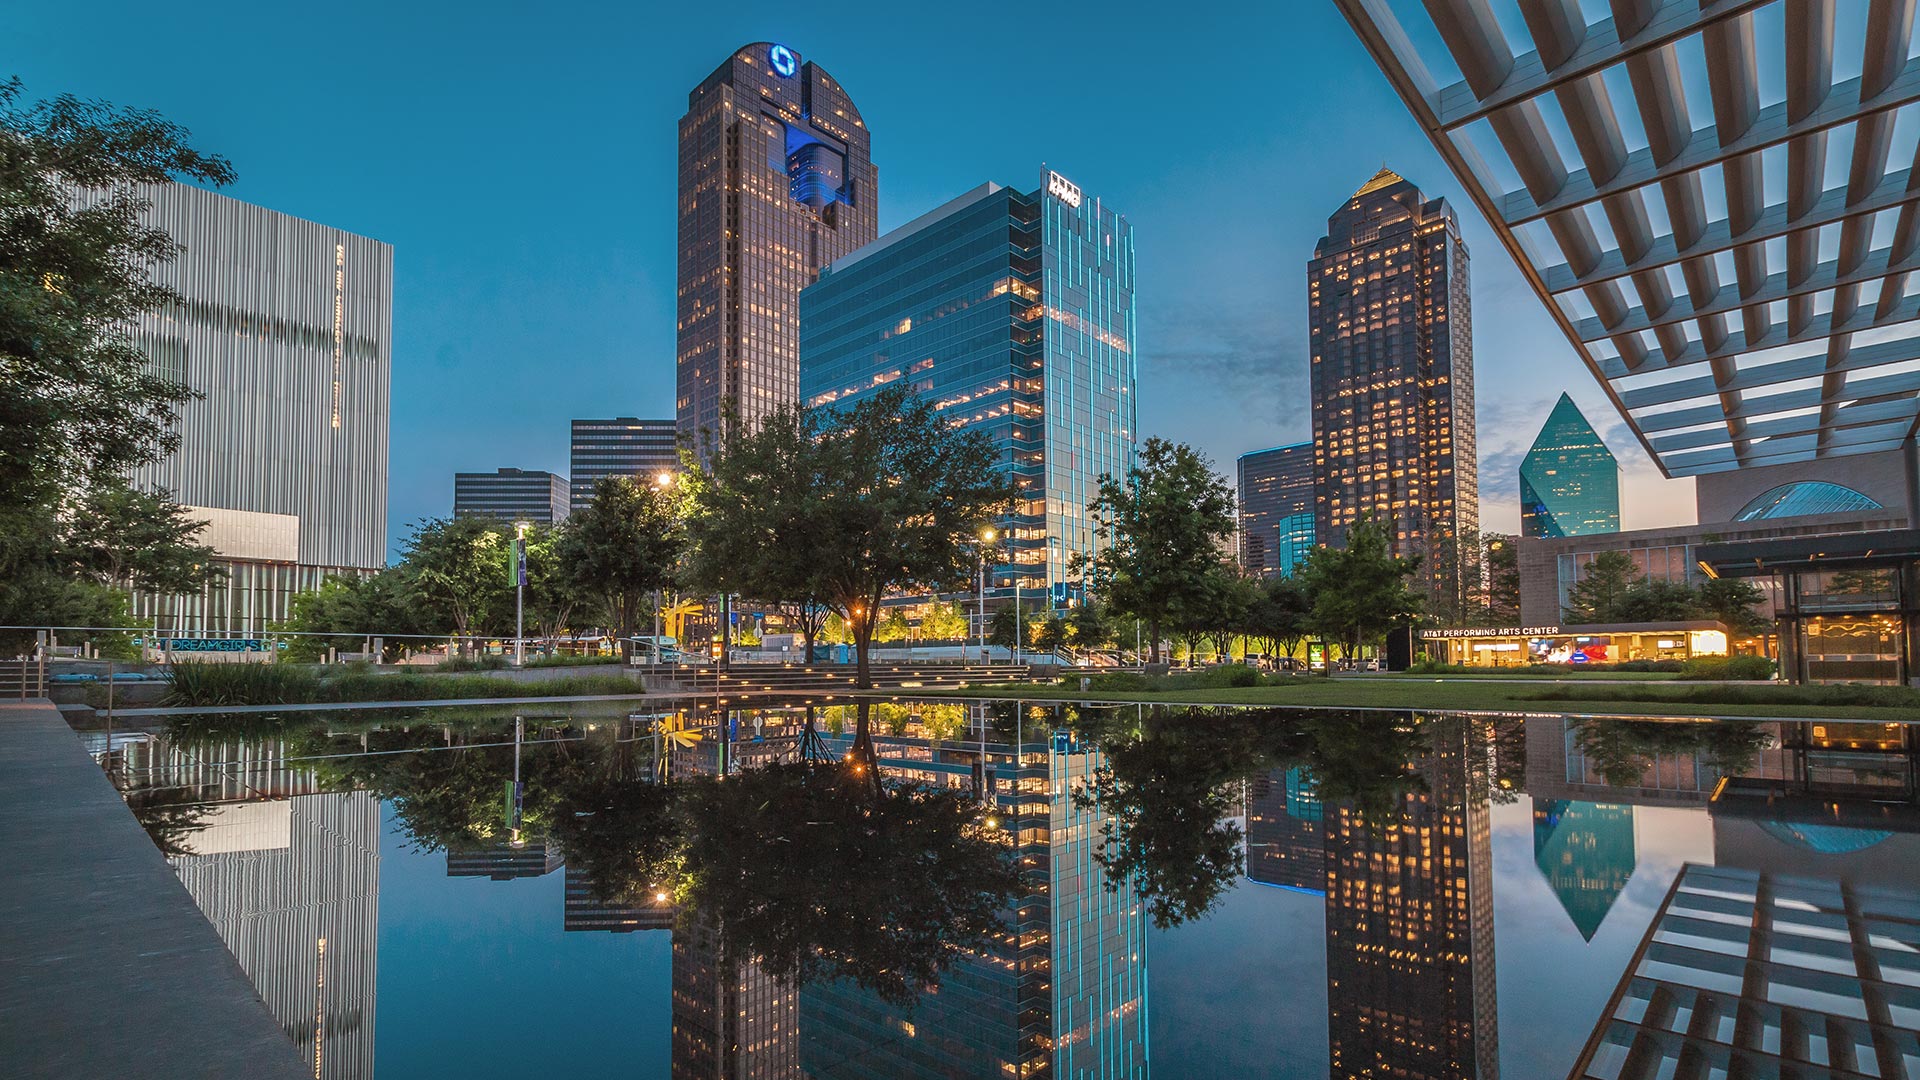 Plan a Dallas, Texas Weekend Getaway, to Find Art, Culture and Excellent Food